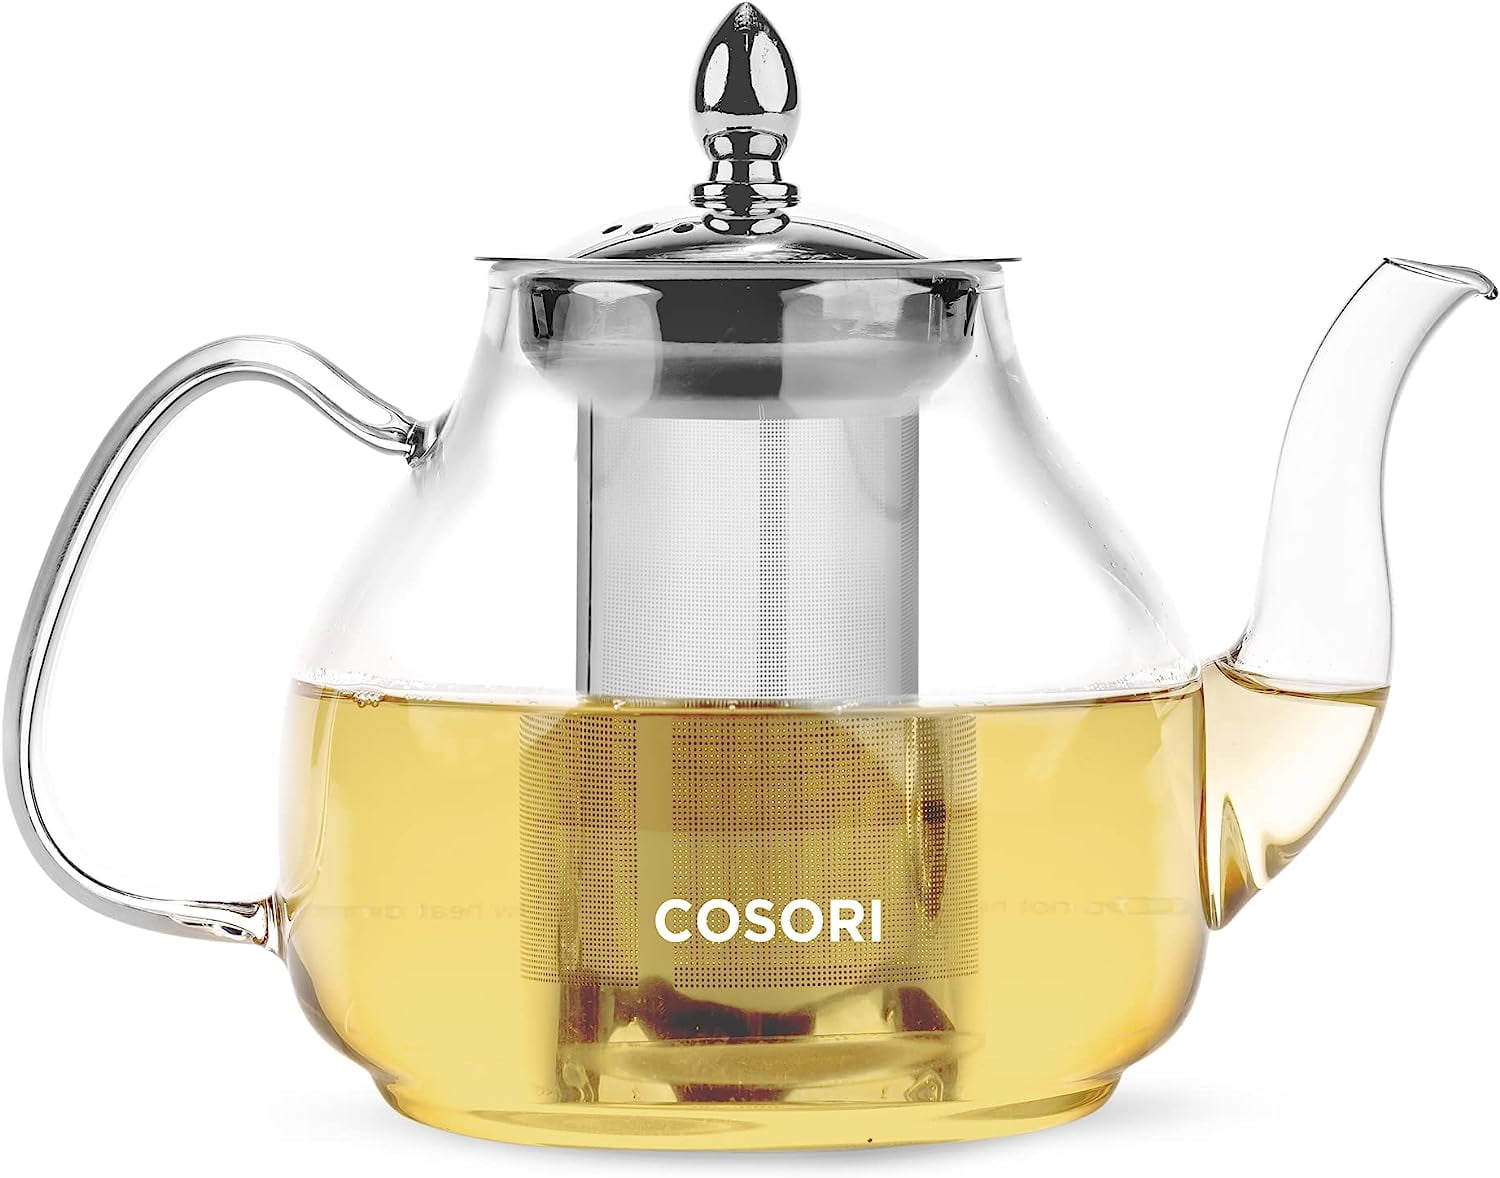 12 Days of Christmas Gifts: COSORI Electric Kettle Gooseneck